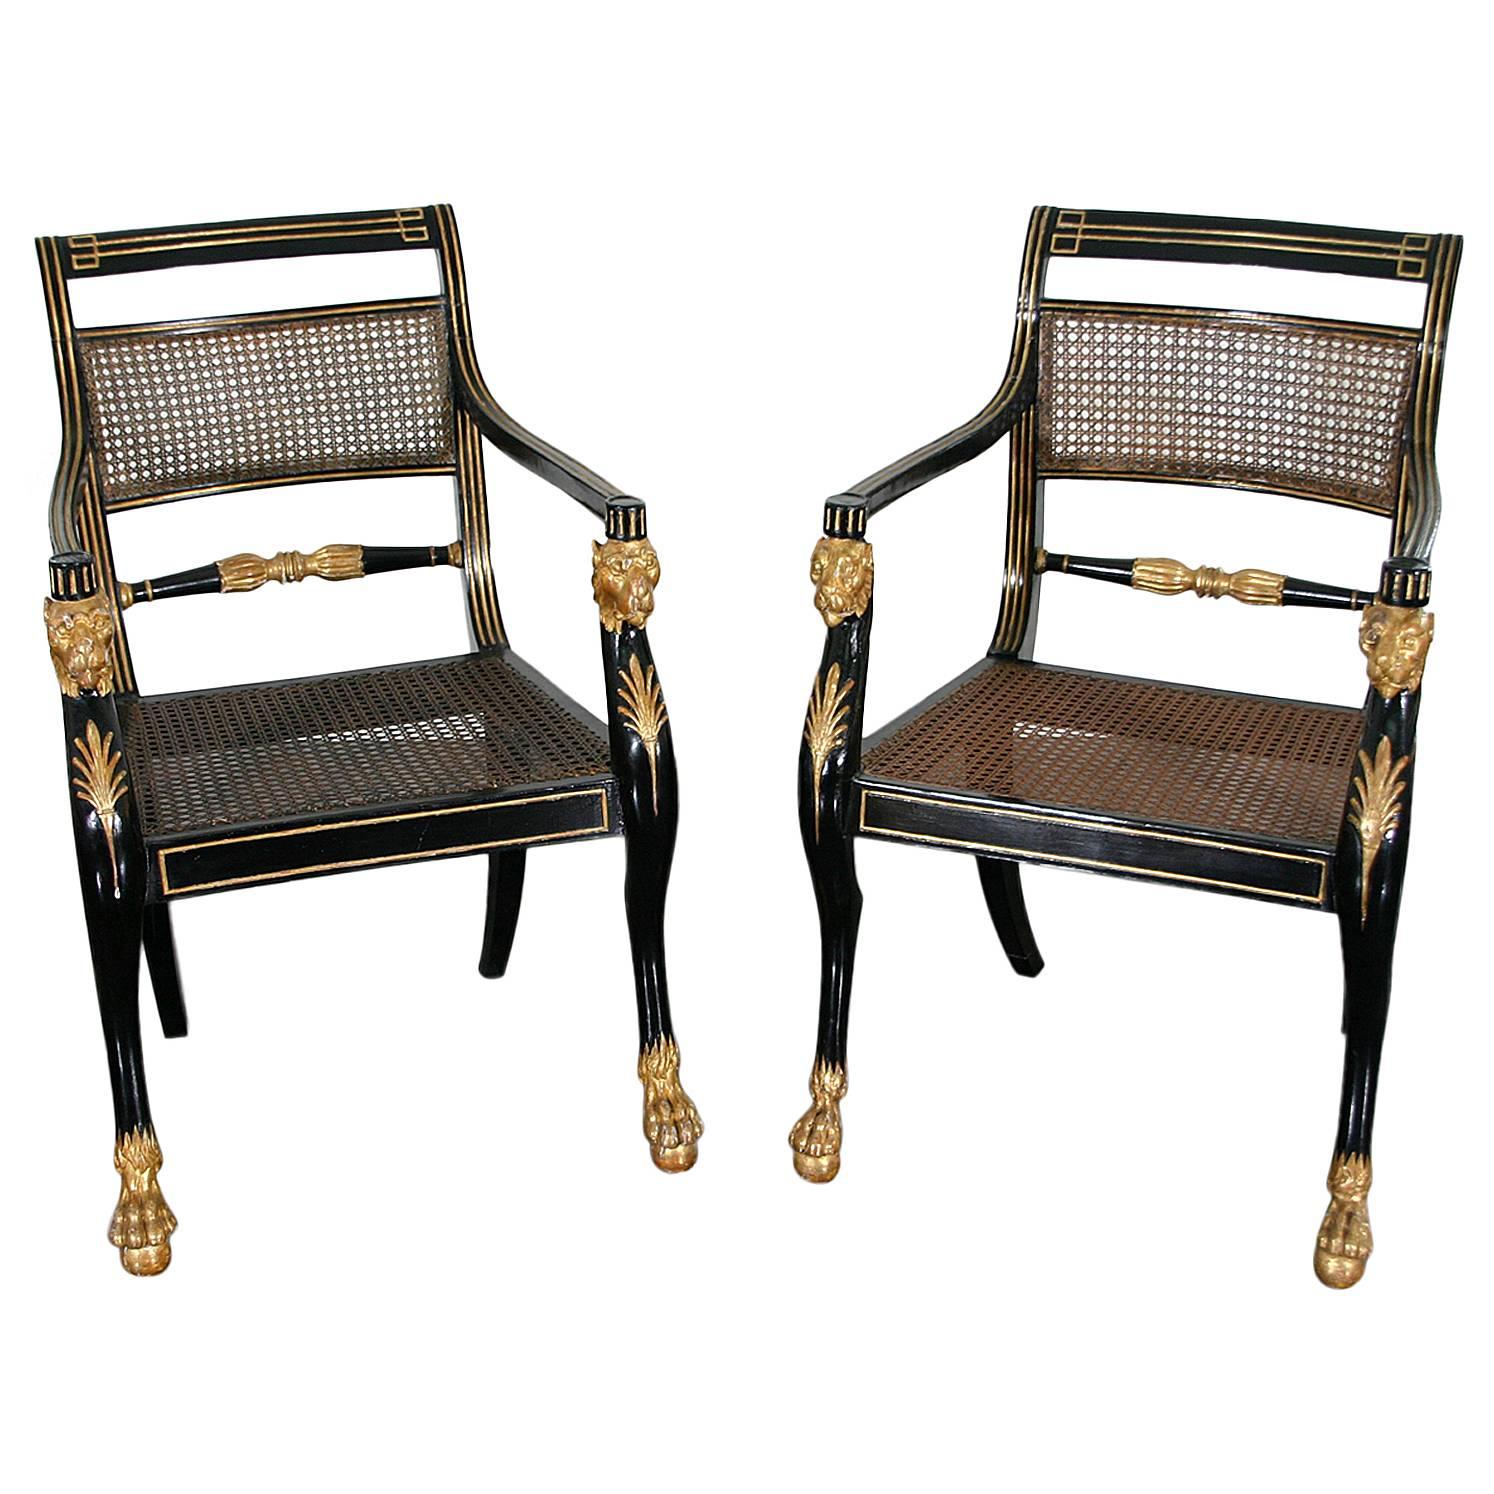 Exceptional Pair of Regency Armchairs